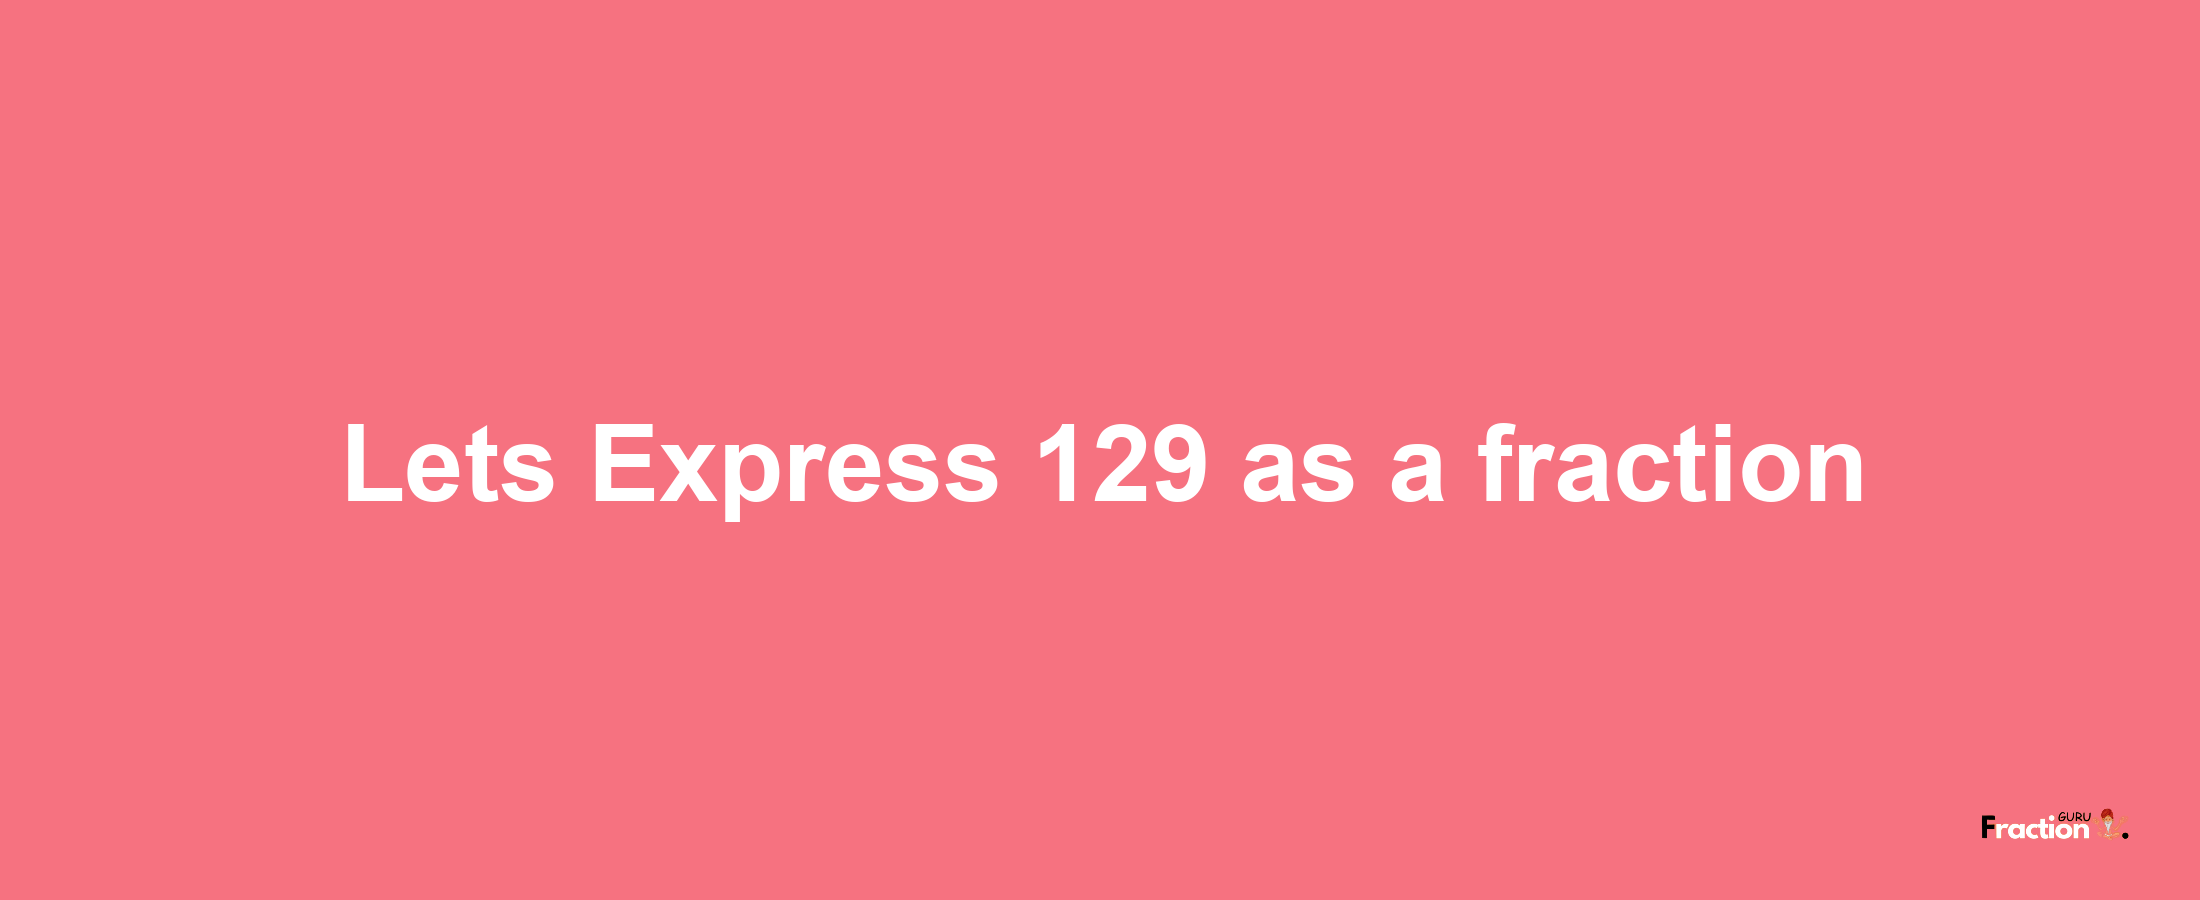 Lets Express 129 as afraction